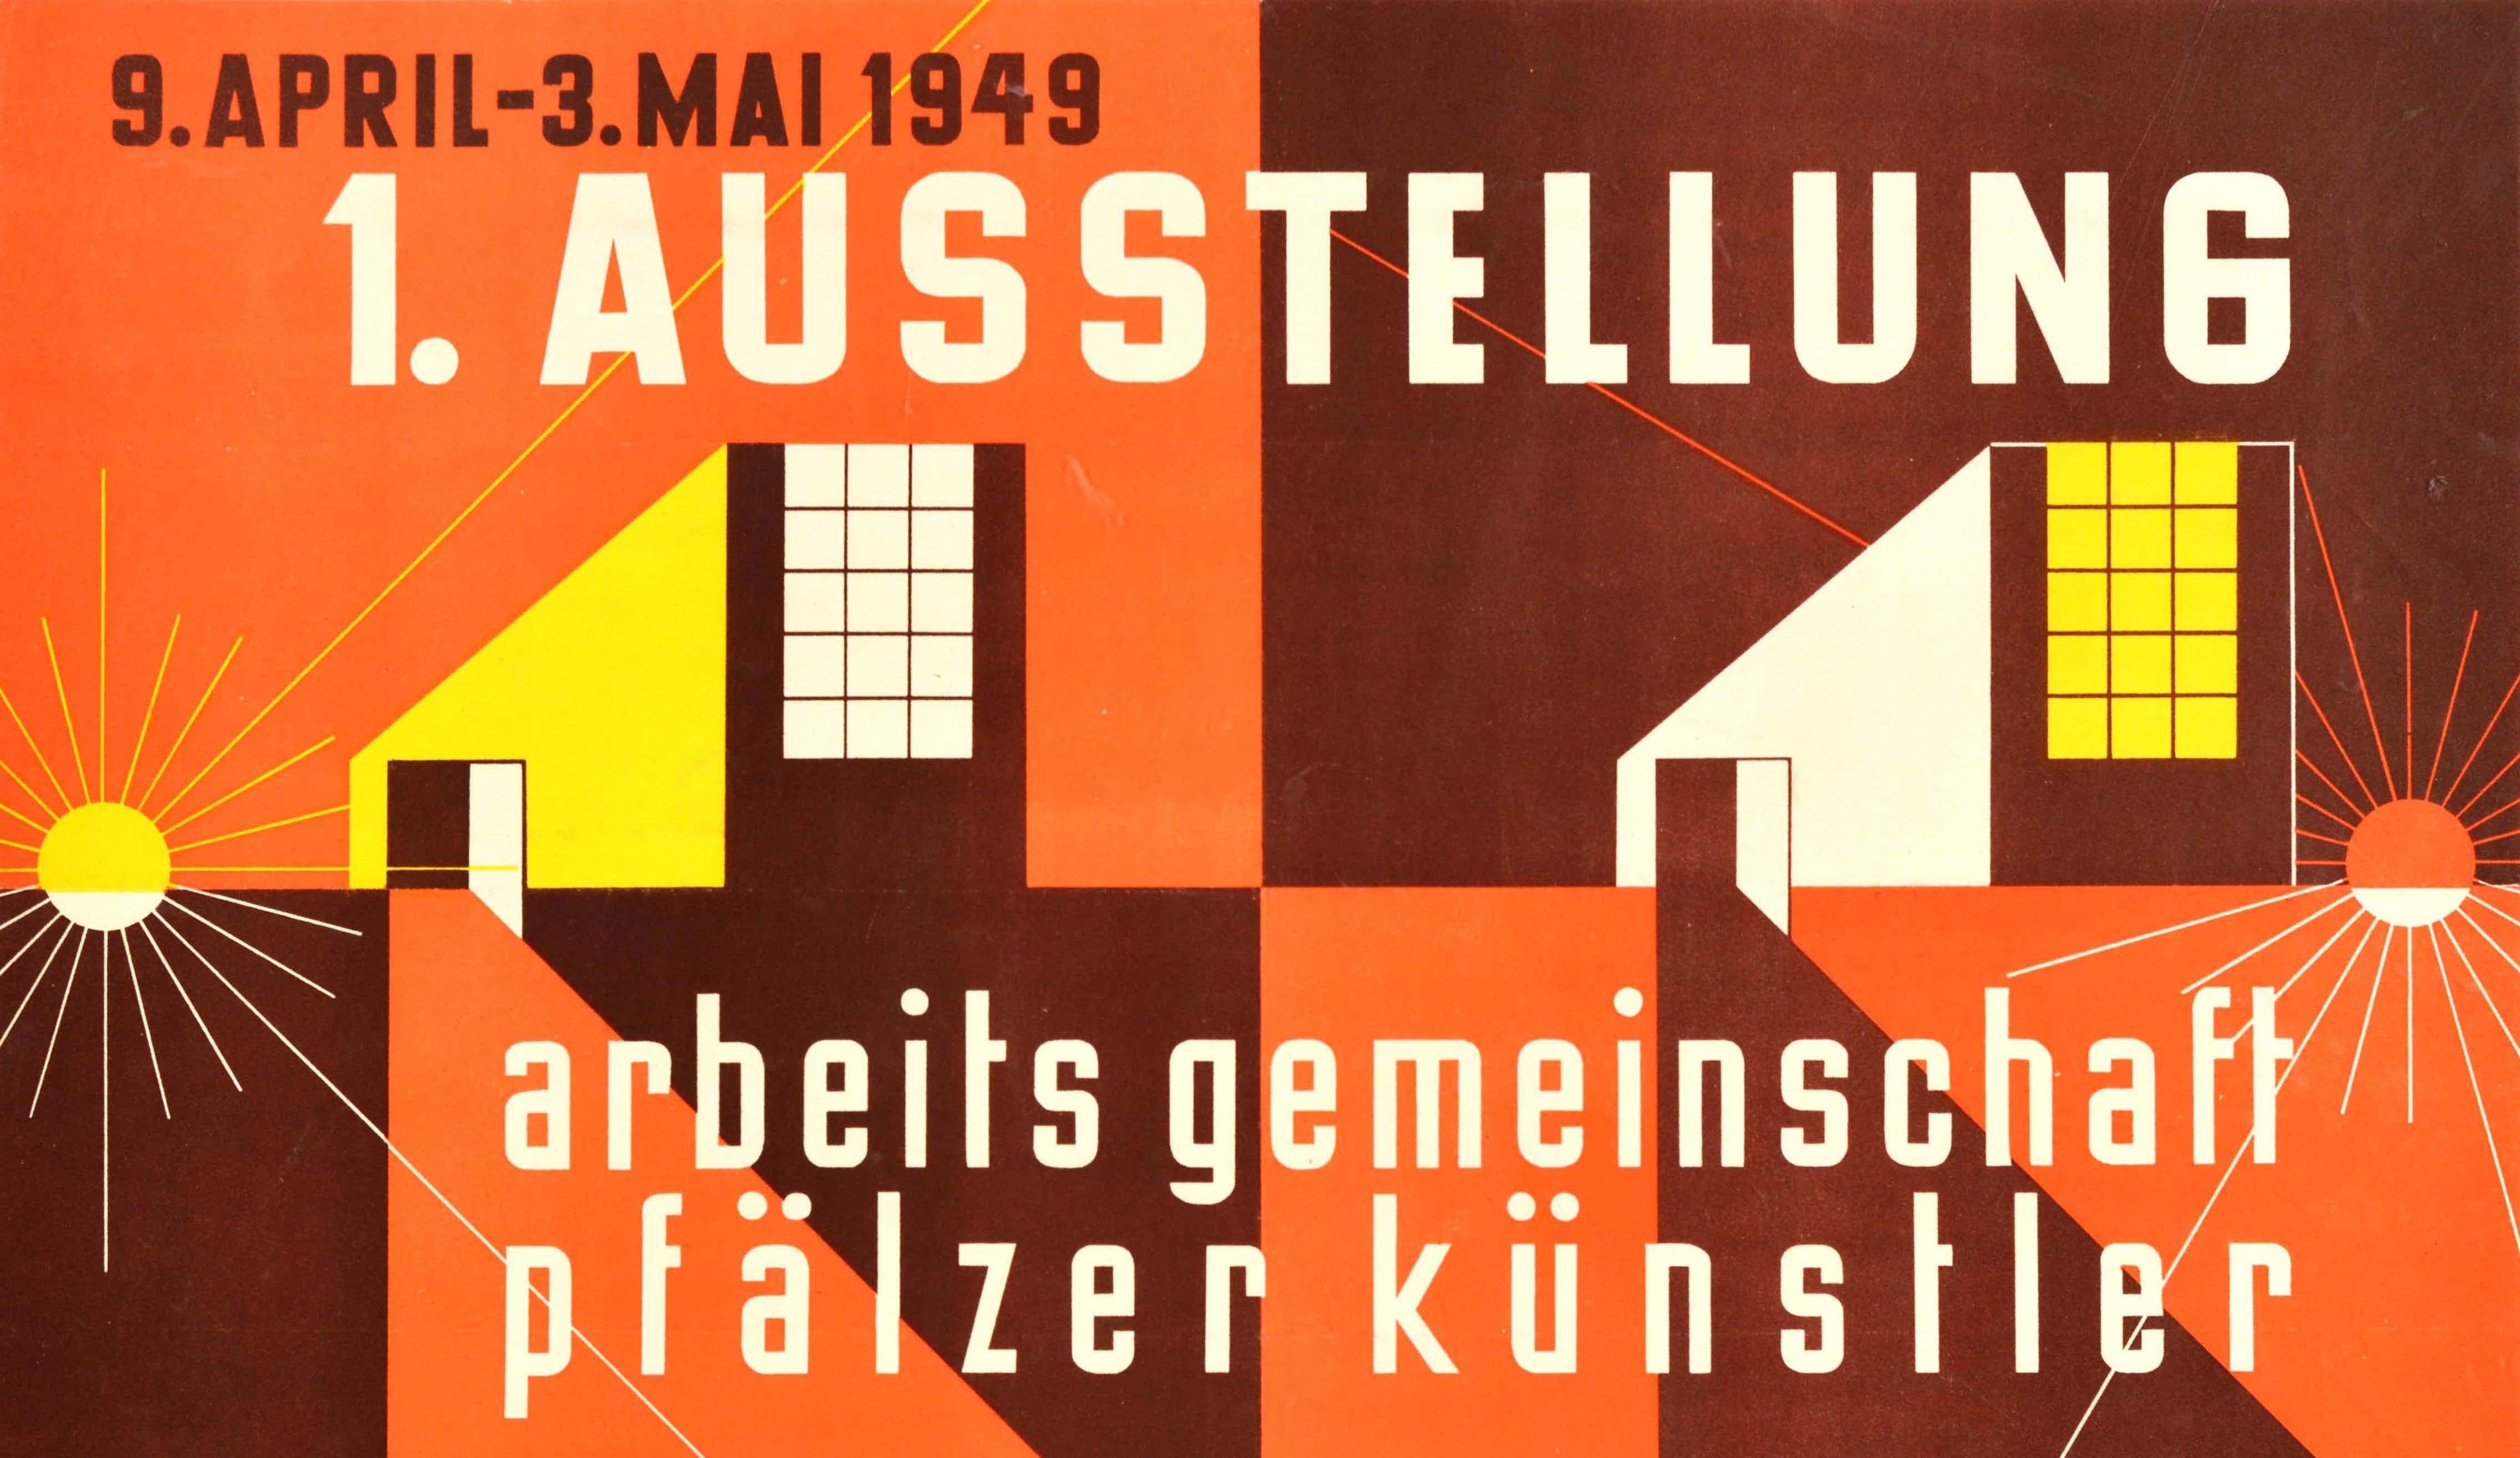 Original vintage advertising poster for the 1st exhibition of the Palatinate Artists Working Group at the Kaiserslautern State Trade Institute held from 9 April to 3 May 1949 / 1 Ausstellung Arbeits Gemeinschaft Pfälzer Künstler Landesgewerbeanstalt